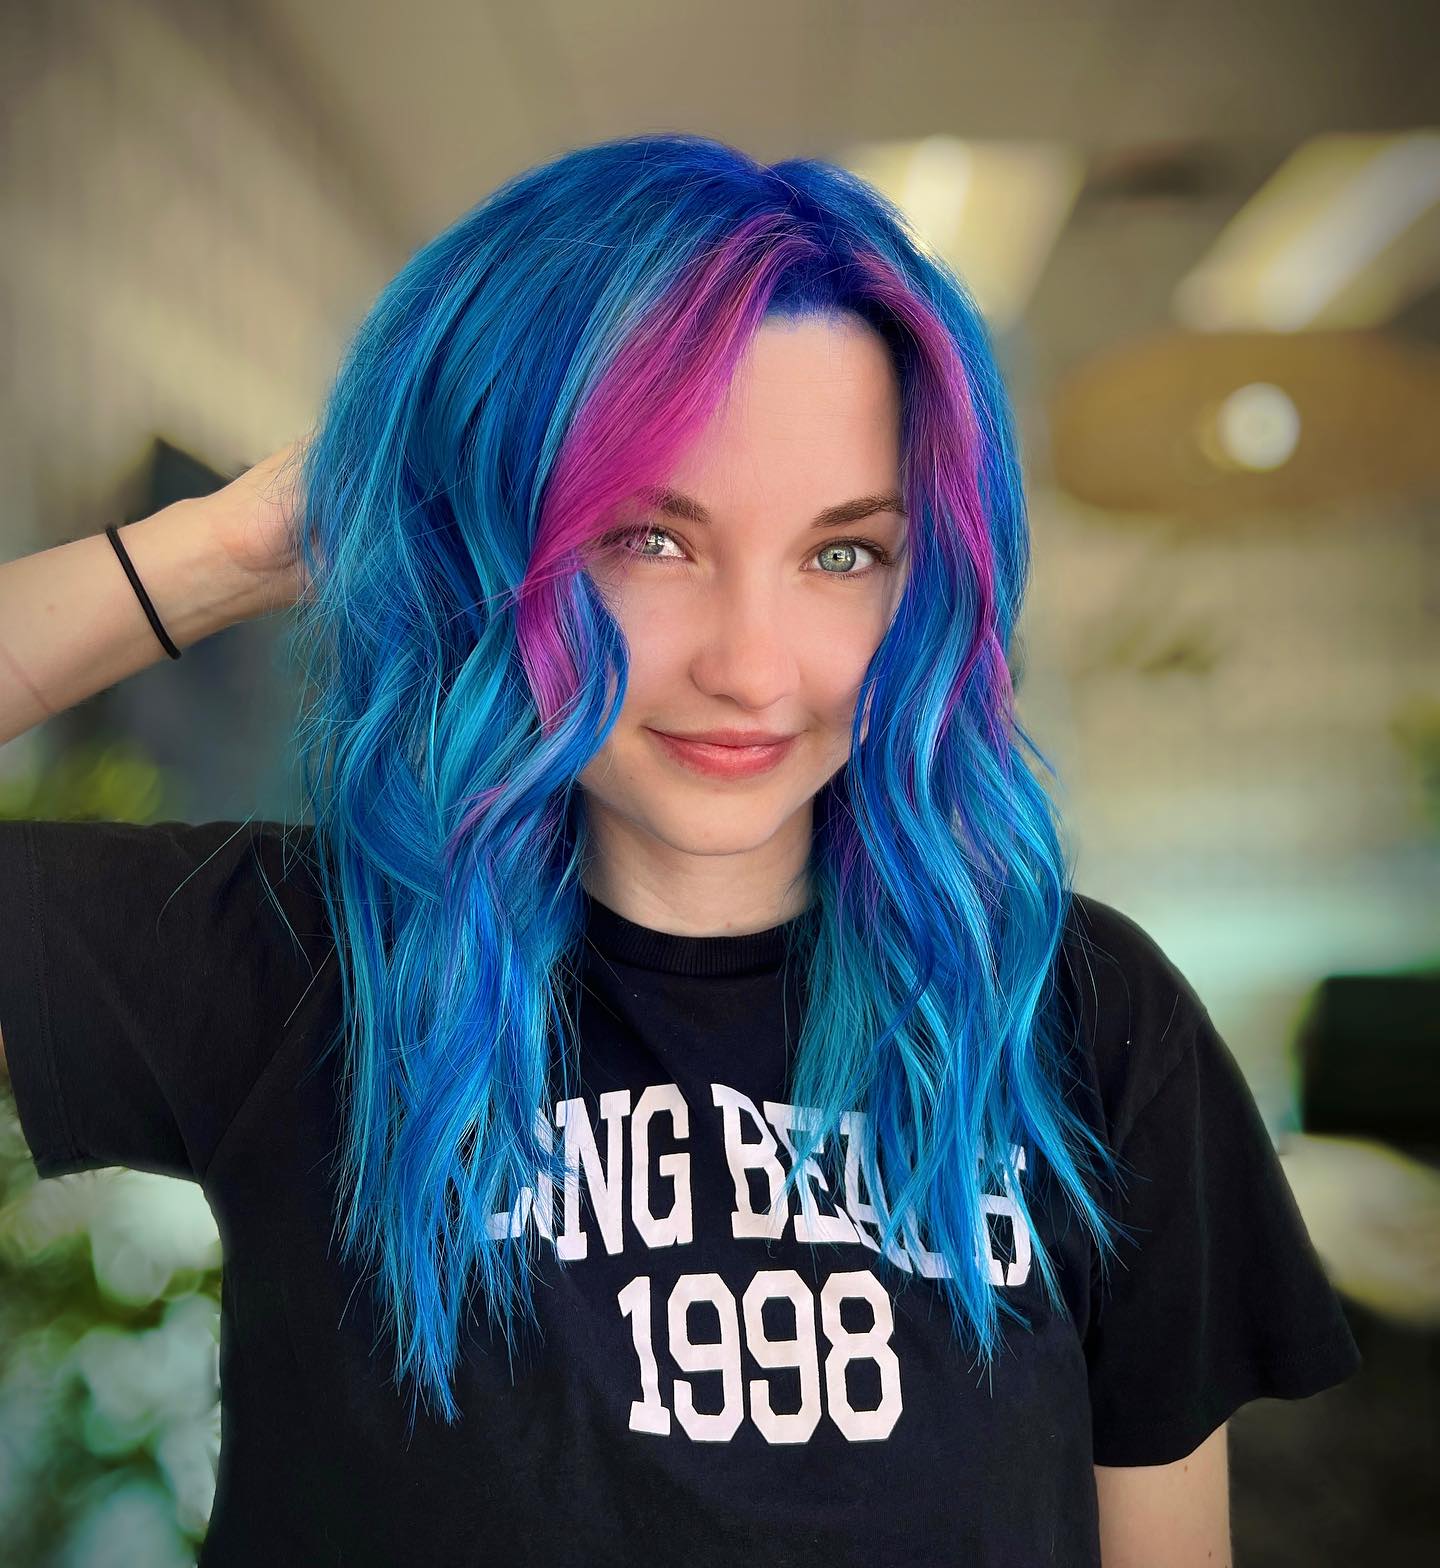 100+ Best Colorful Hair Ideas images 27